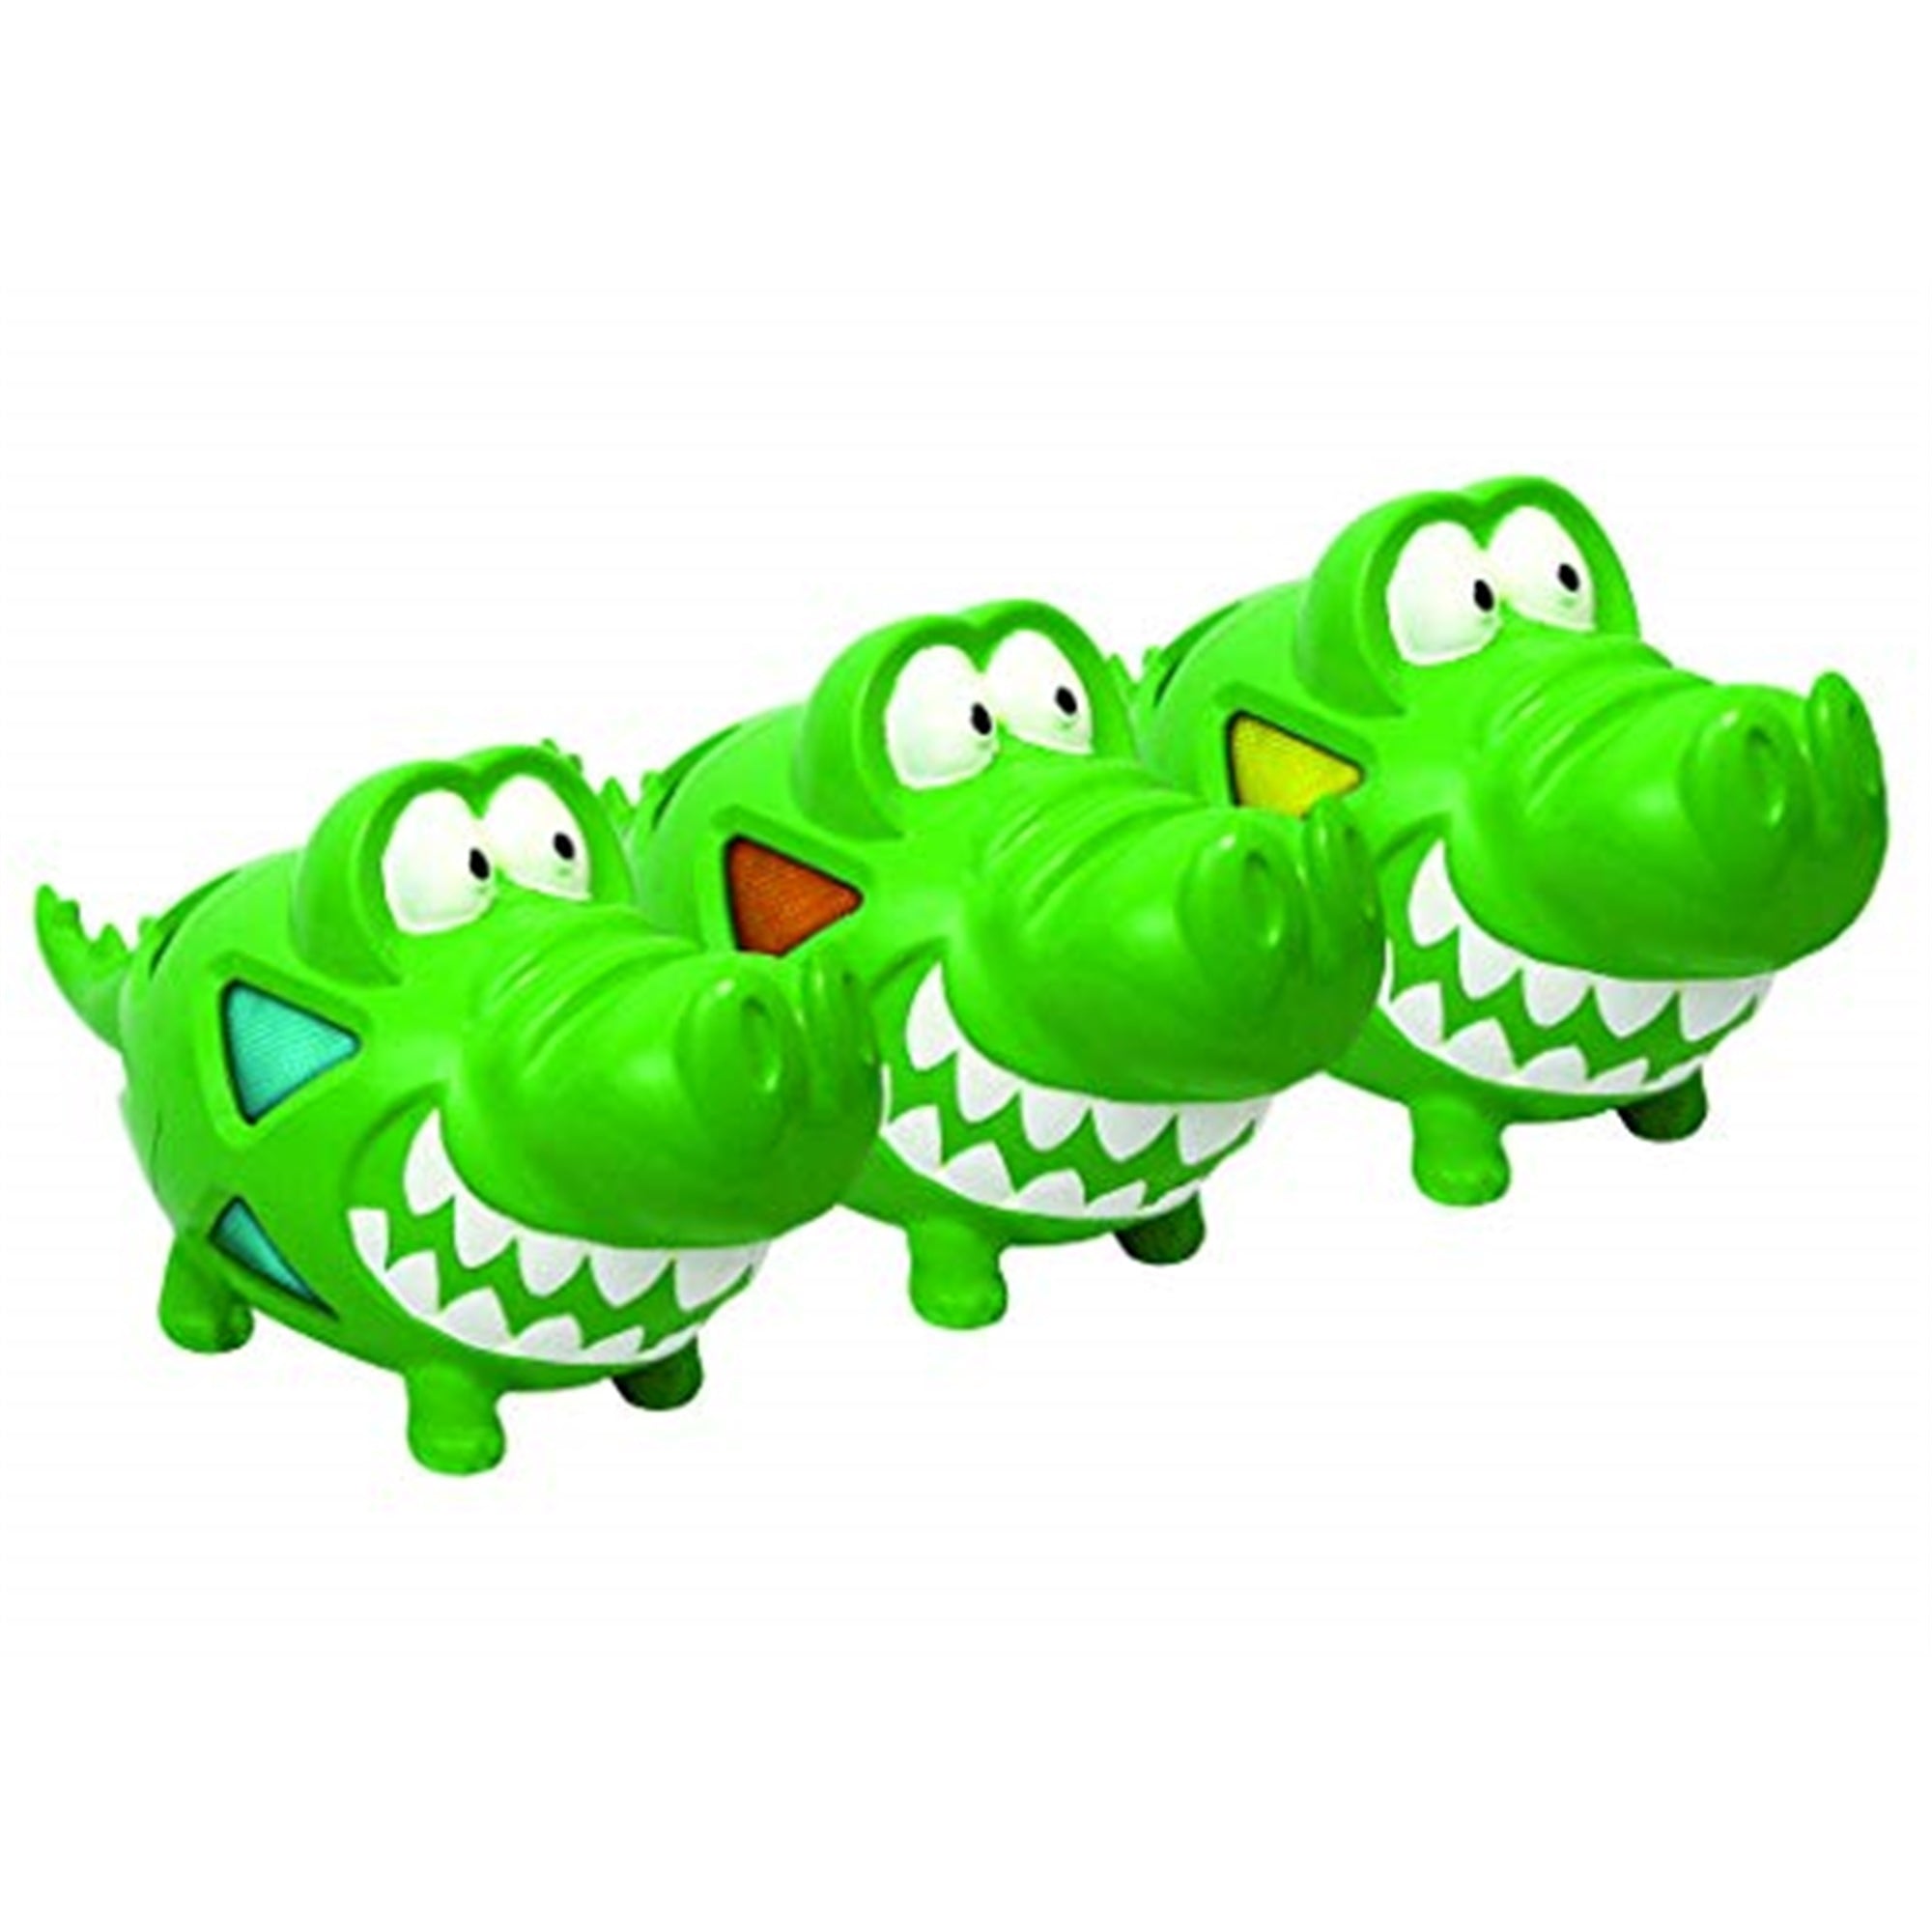 Multipet Multi-Armor Gator Dog Toy, Assorted Colors, 8" (1 Count)